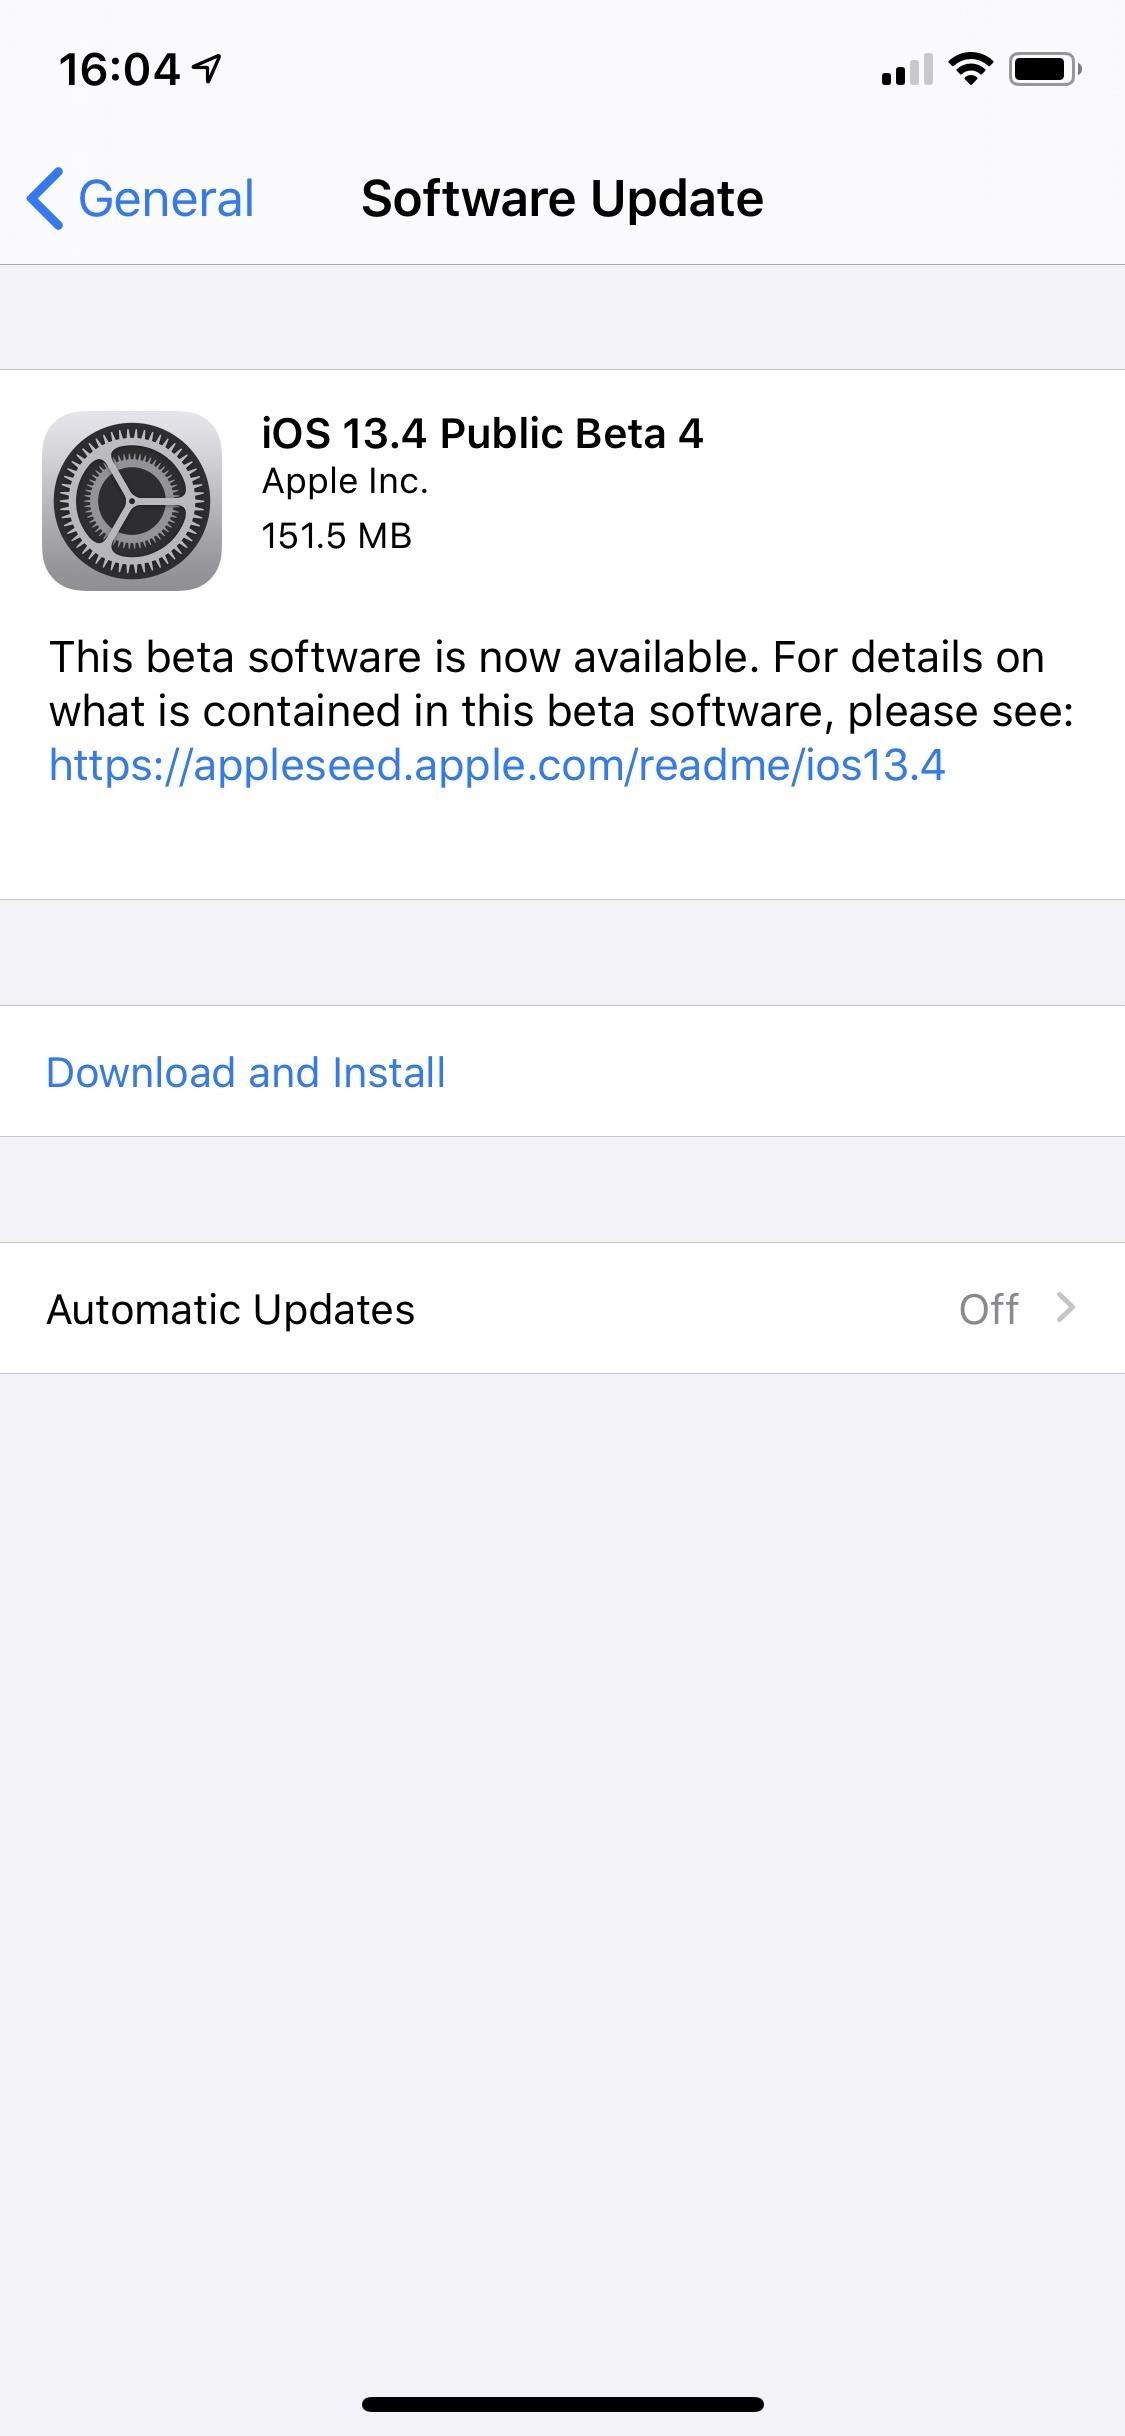 Apple Releases Fourth iOS 13.4 Public Beta for iPhone Today